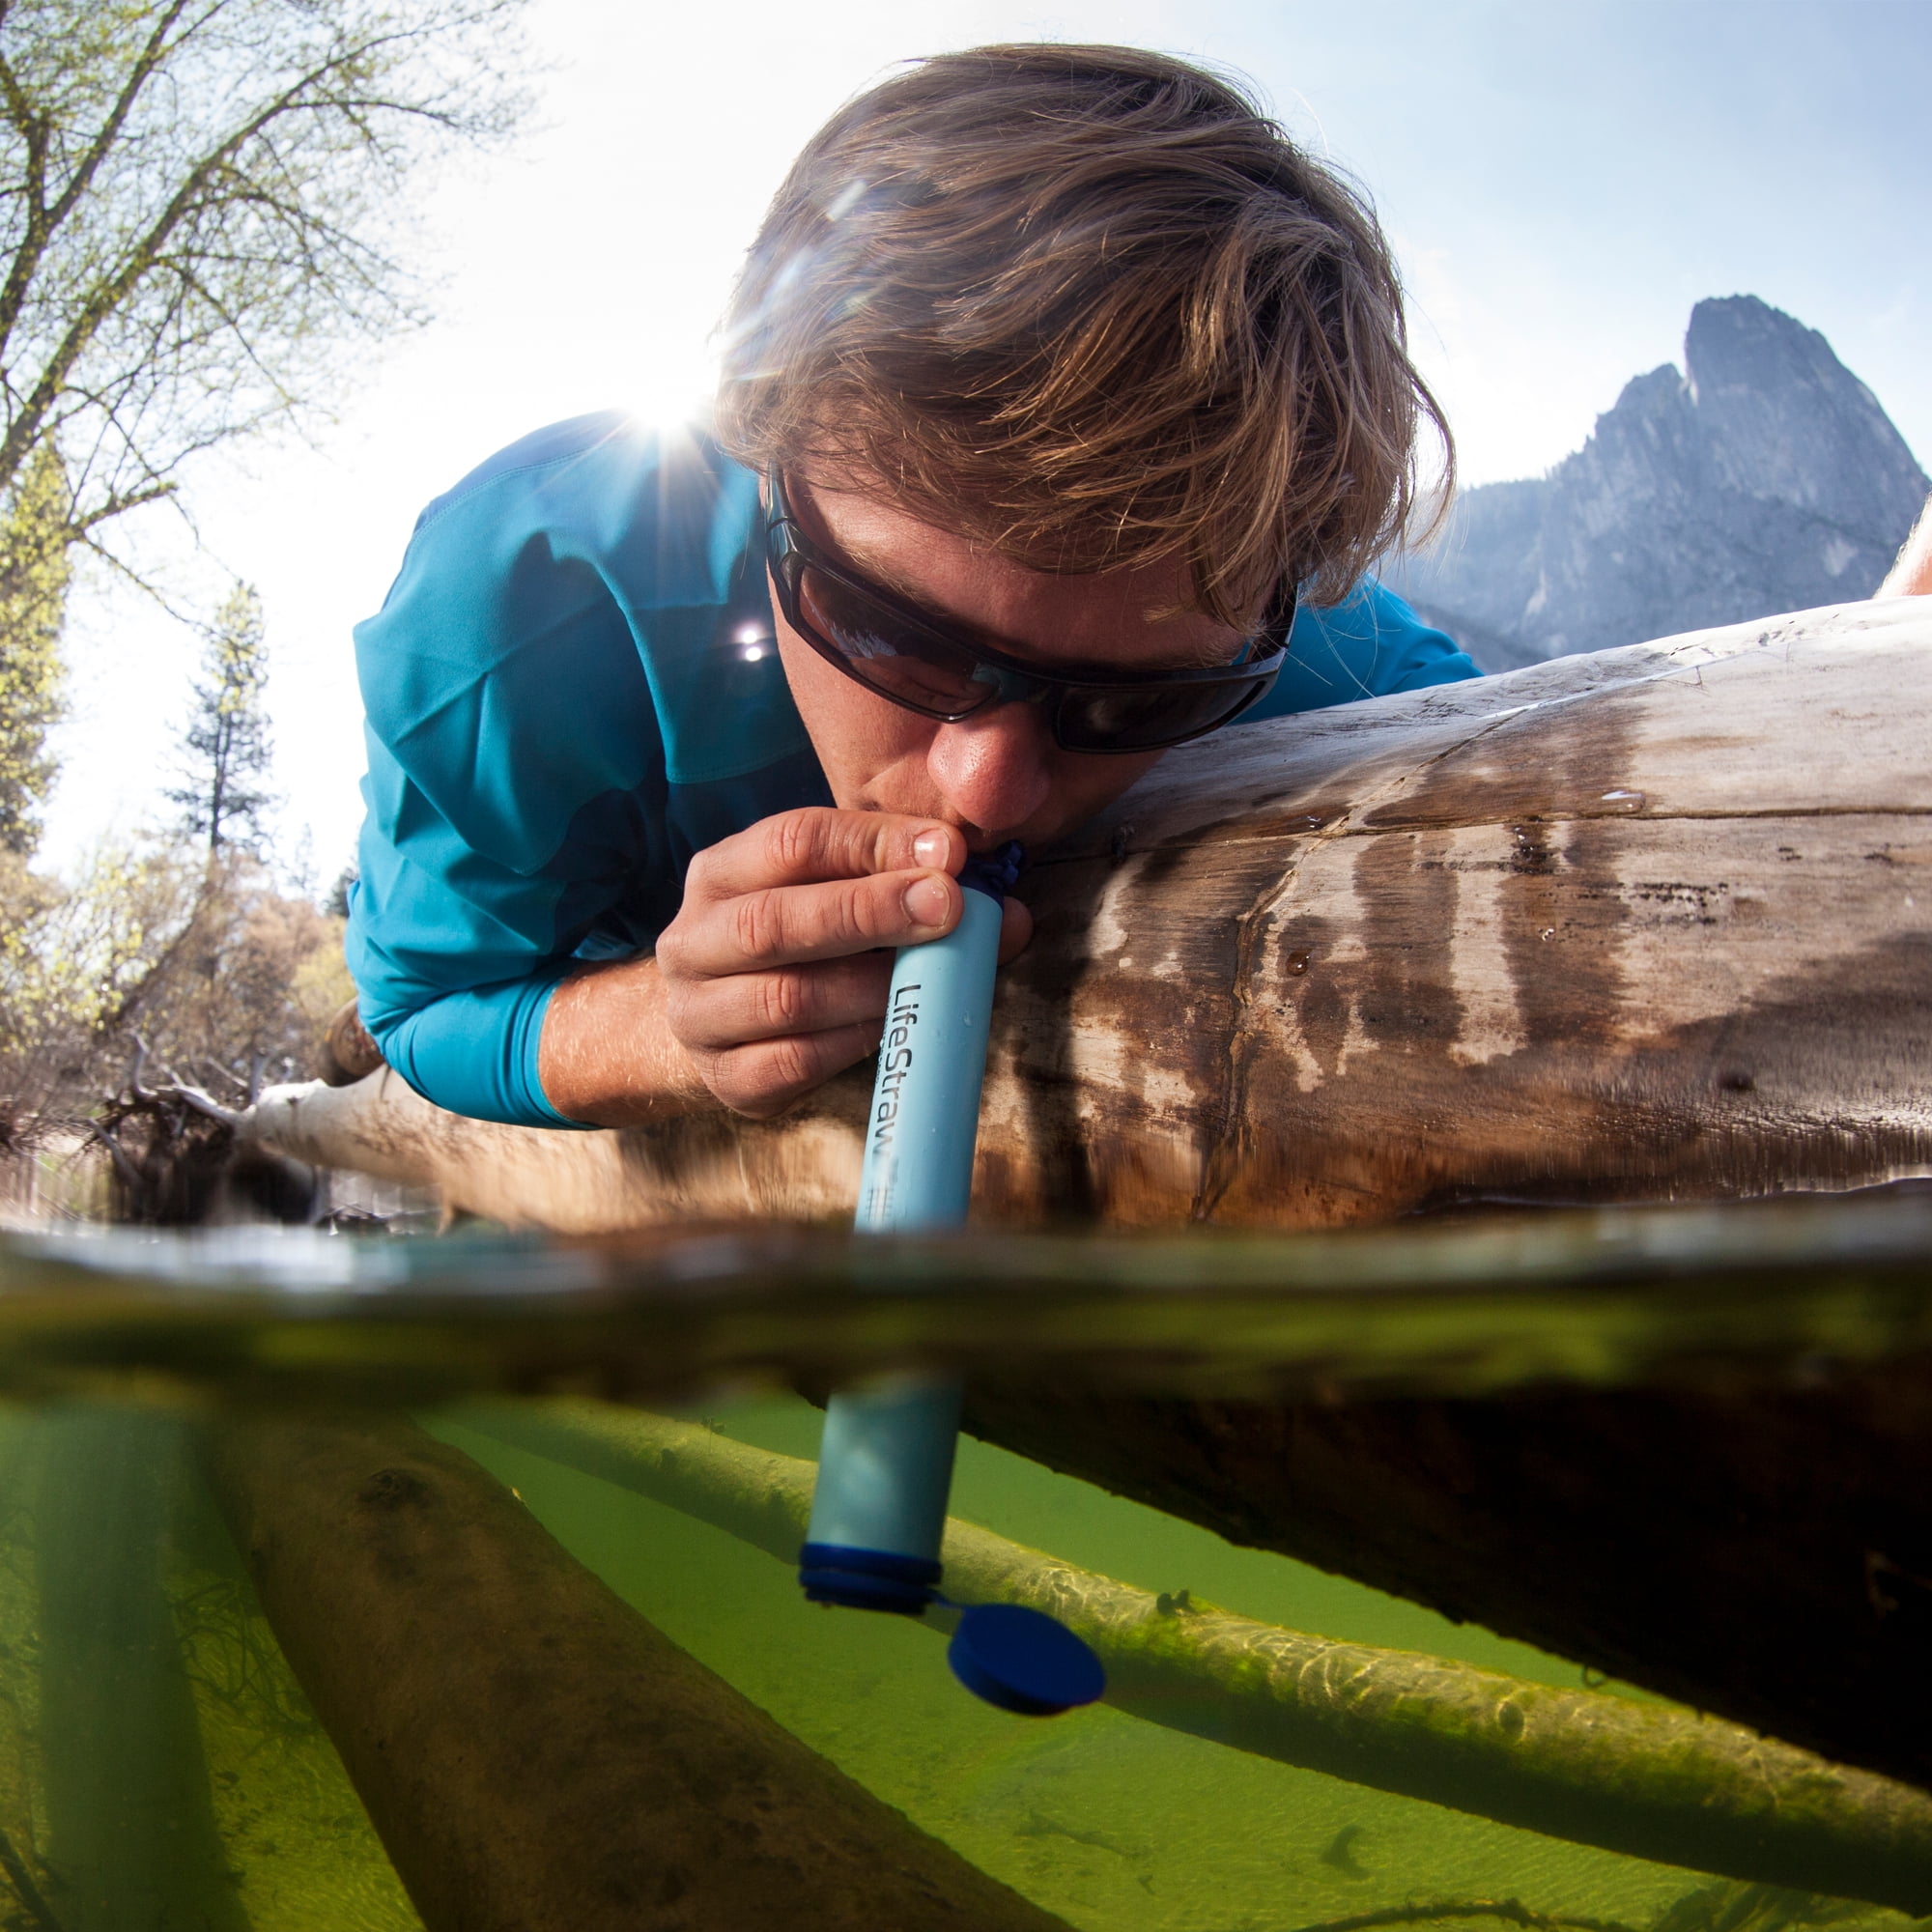 New Mexico Nomad : LifeStraw Personal Water Filter